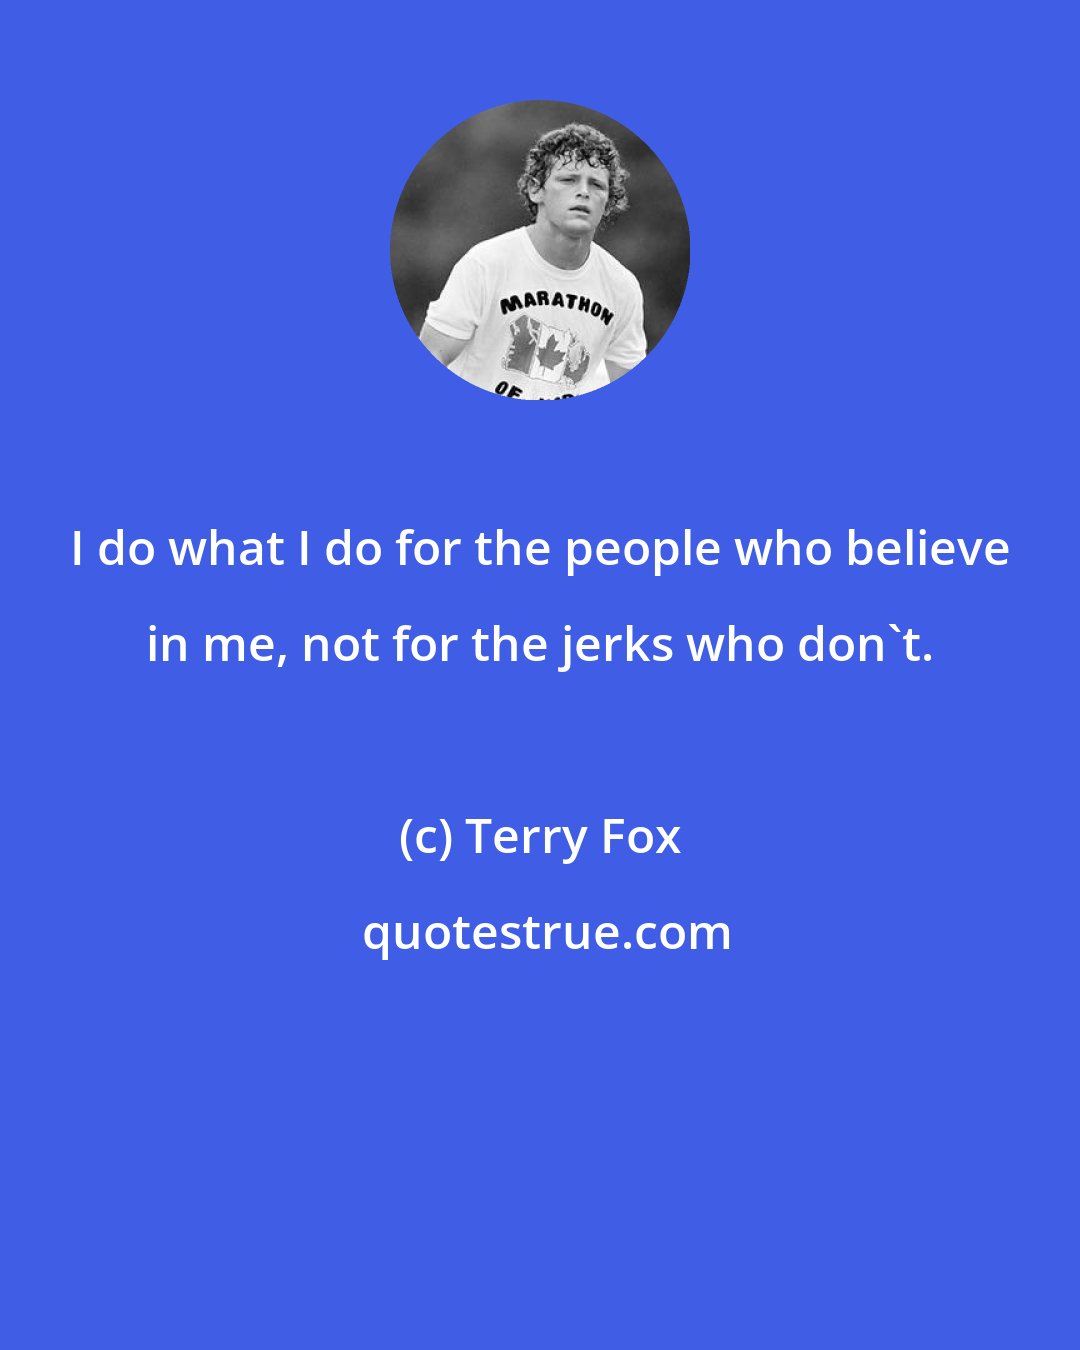 Terry Fox: I do what I do for the people who believe in me, not for the jerks who don't.